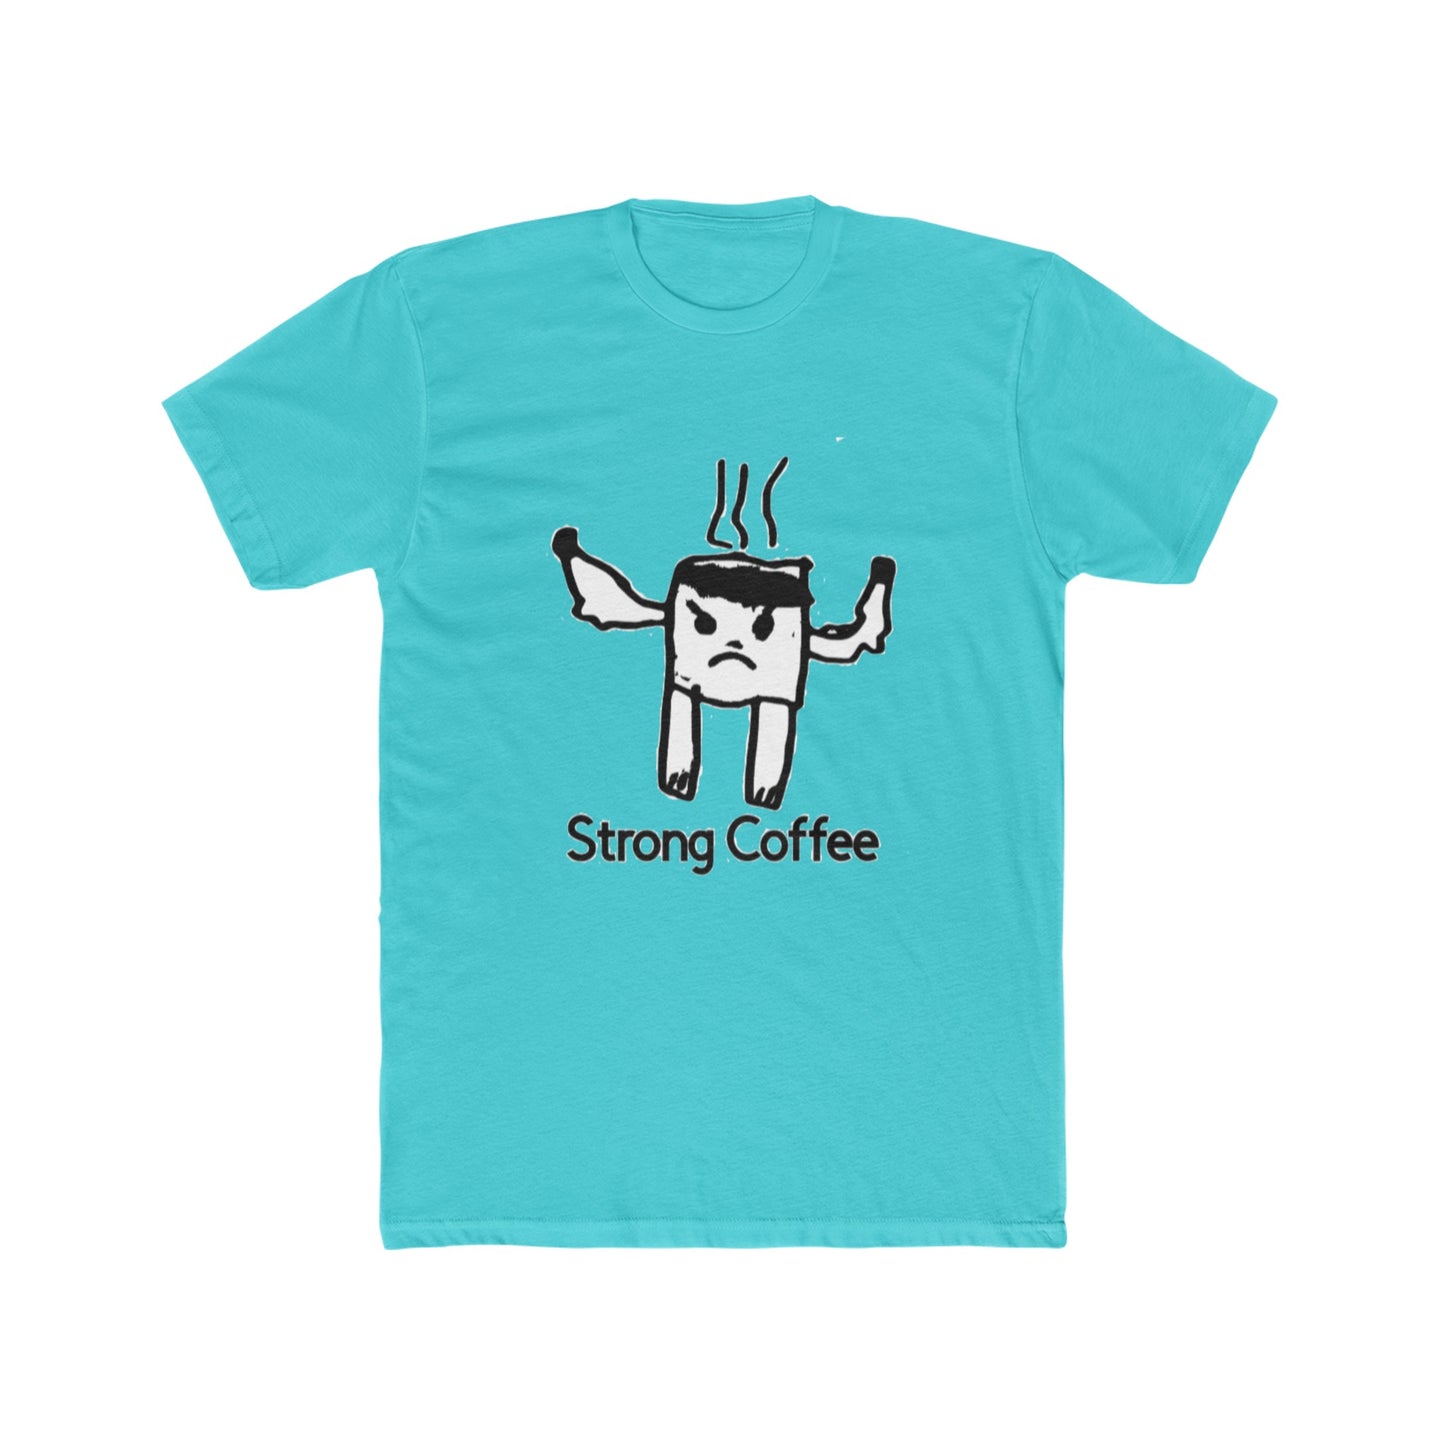 "Strong Coffee" by Emmalyn Next Level Tee